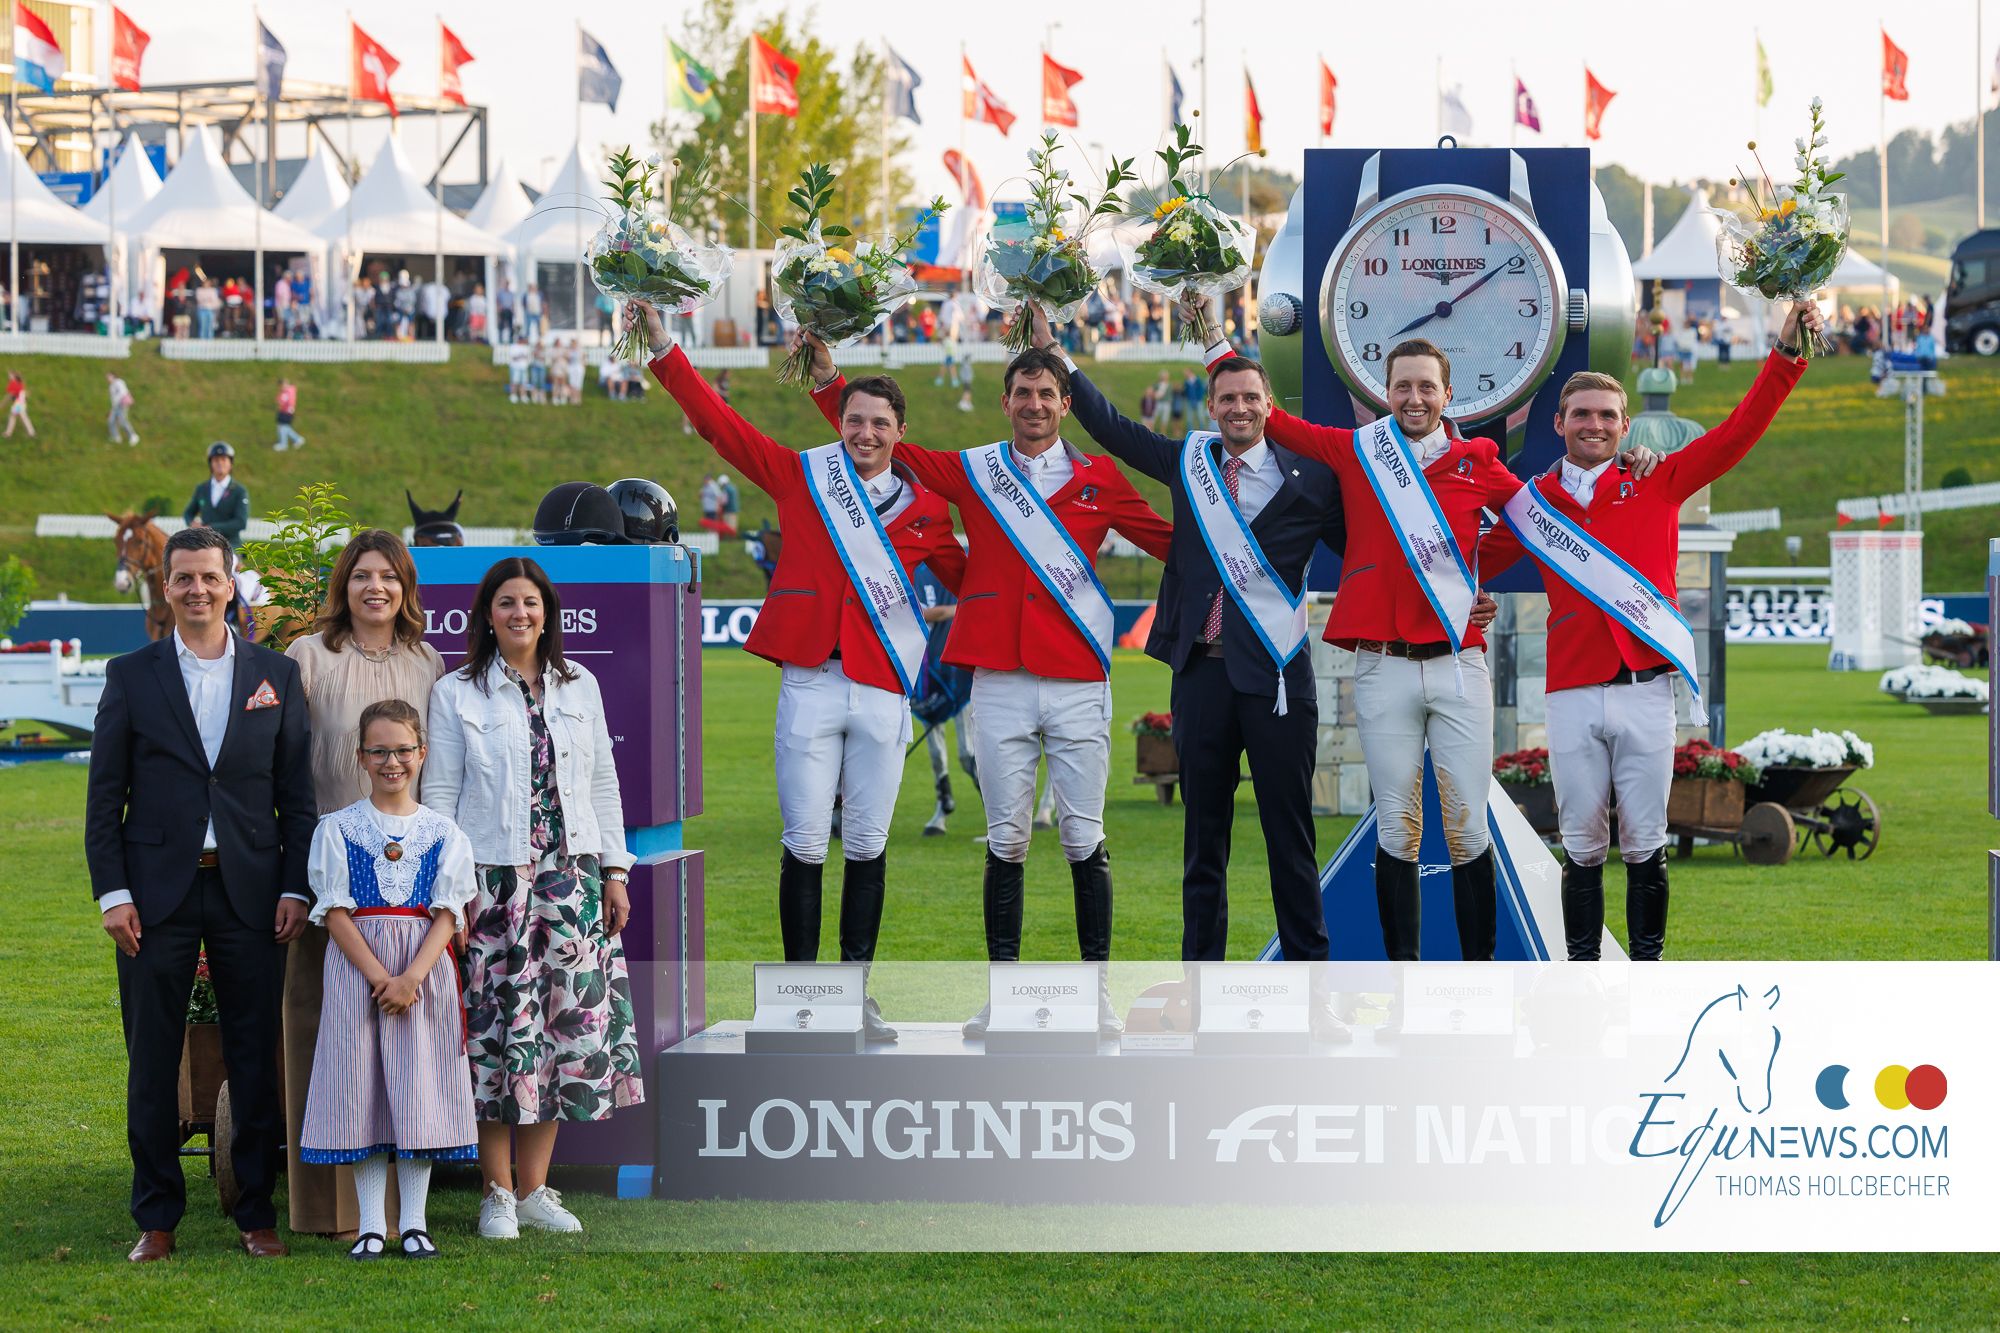 Michel Sorg appointed to the FEI Jumping Committee